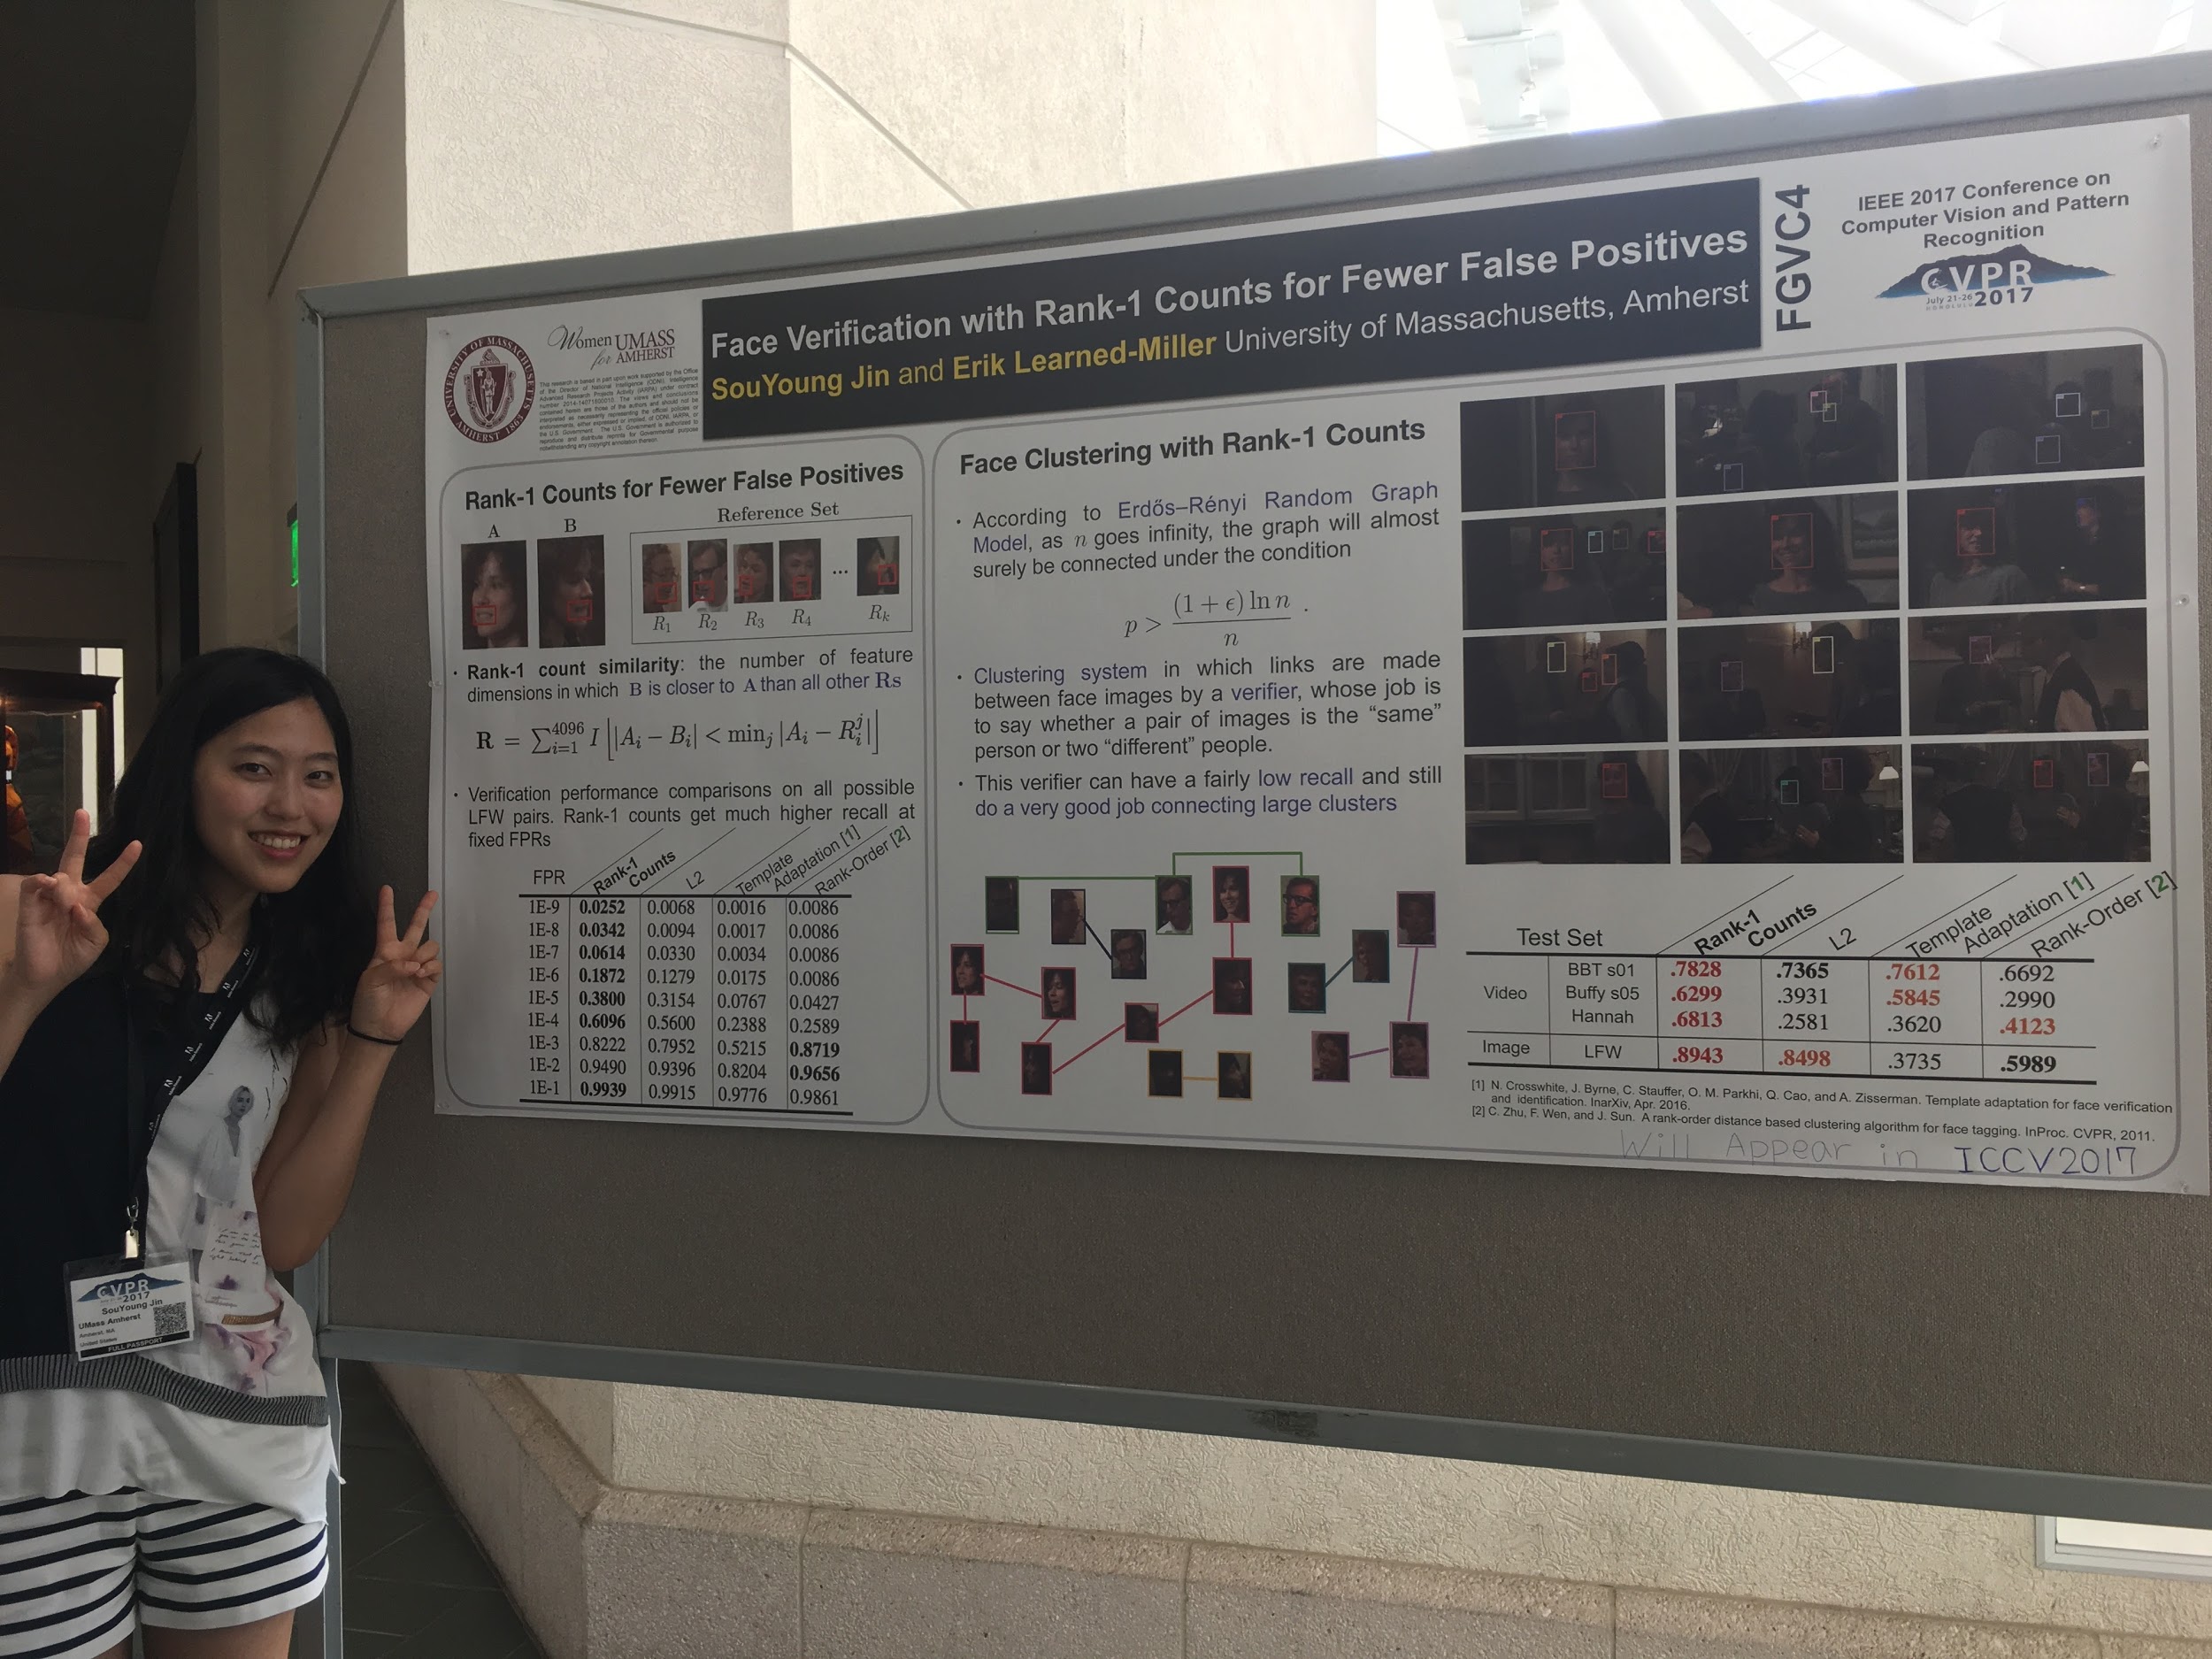 SouYoung at her poster presentation